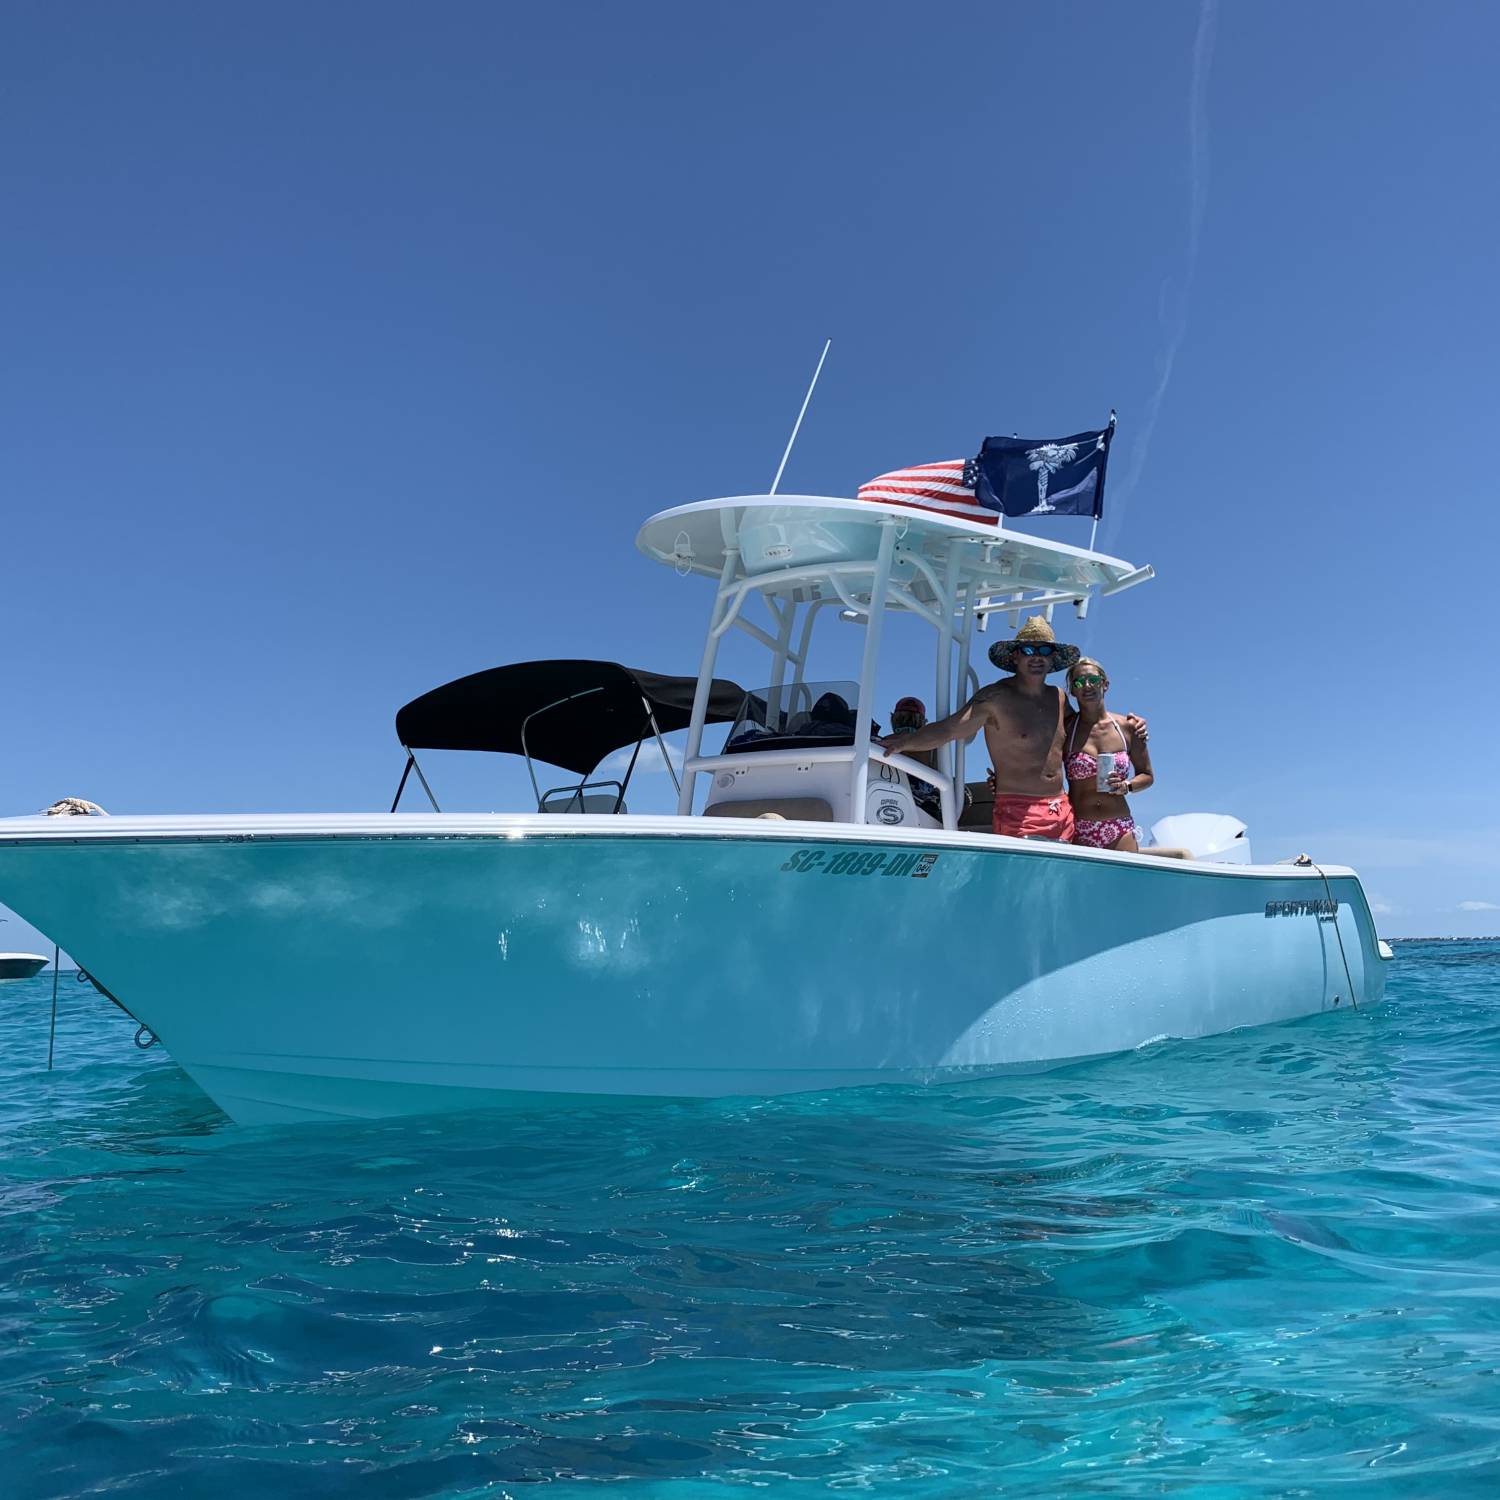 Title: Florida Keys Fun - On board their Sportsman Open 232 Center Console - Location: Sombrero Reef Lighthouse. Participating in the Photo Contest #SportsmanAugust2021